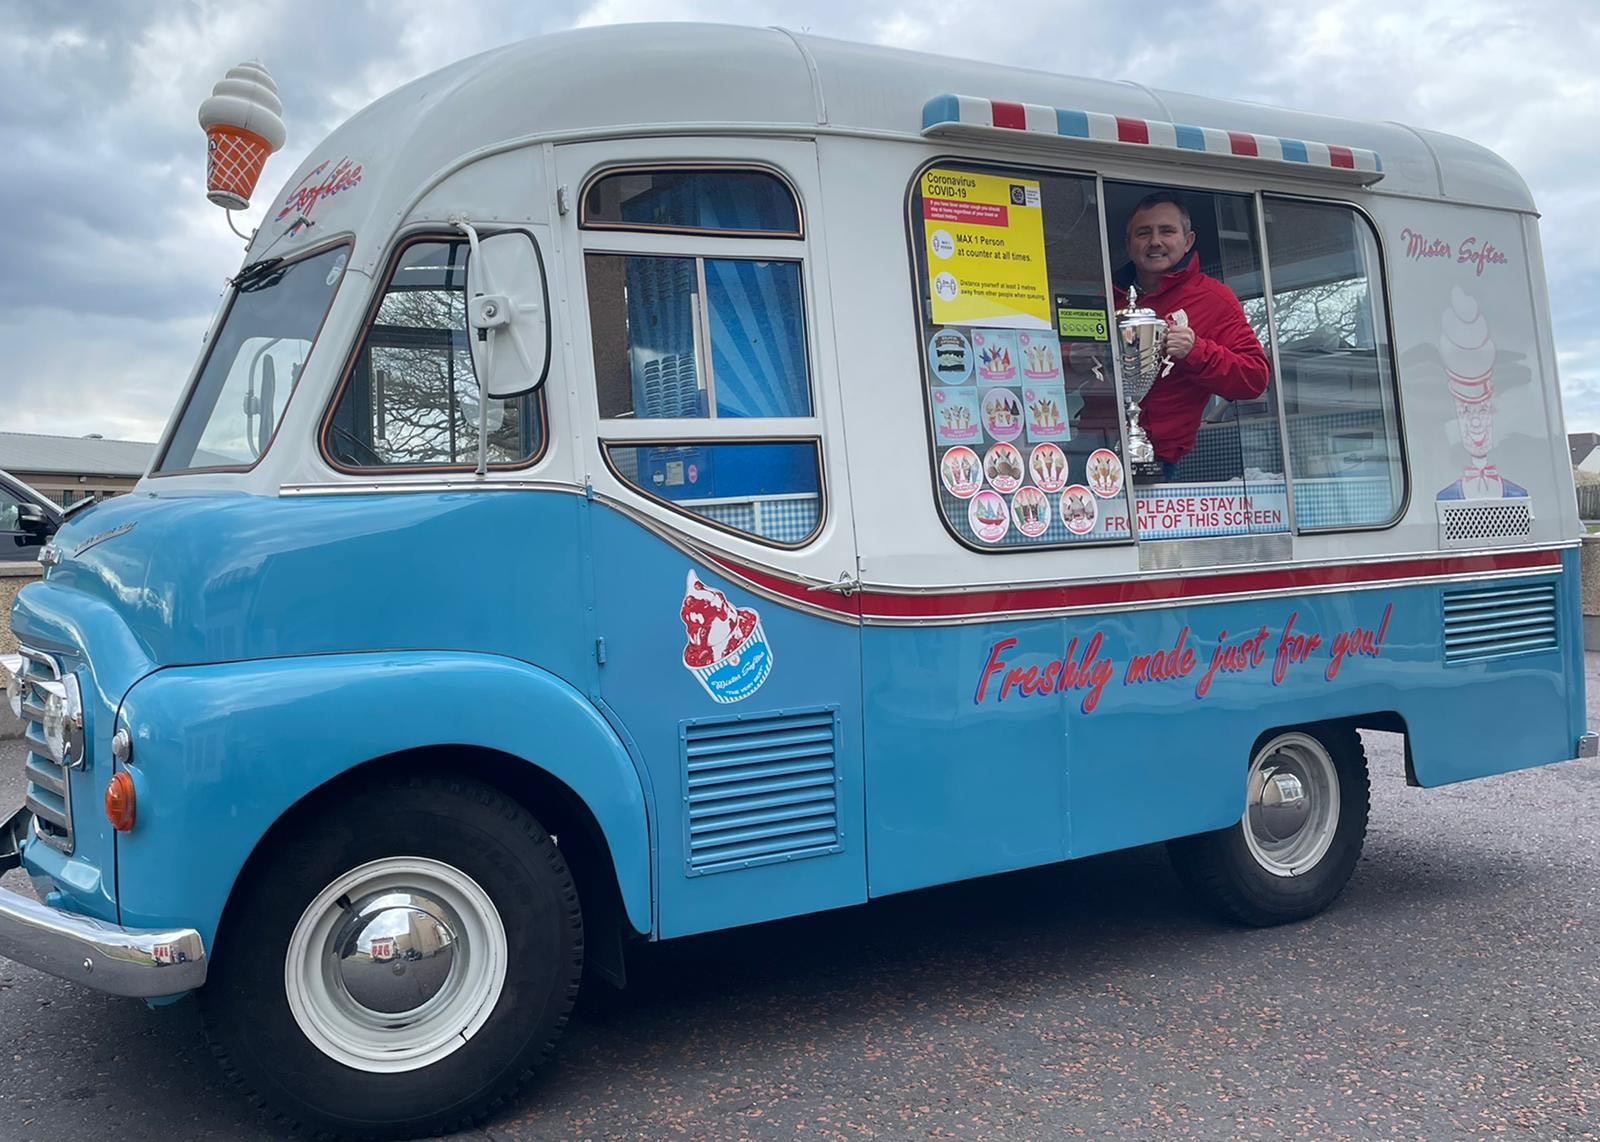 Northern Ireland takes Ice Cream Van of the Year title for the first time in 43 years